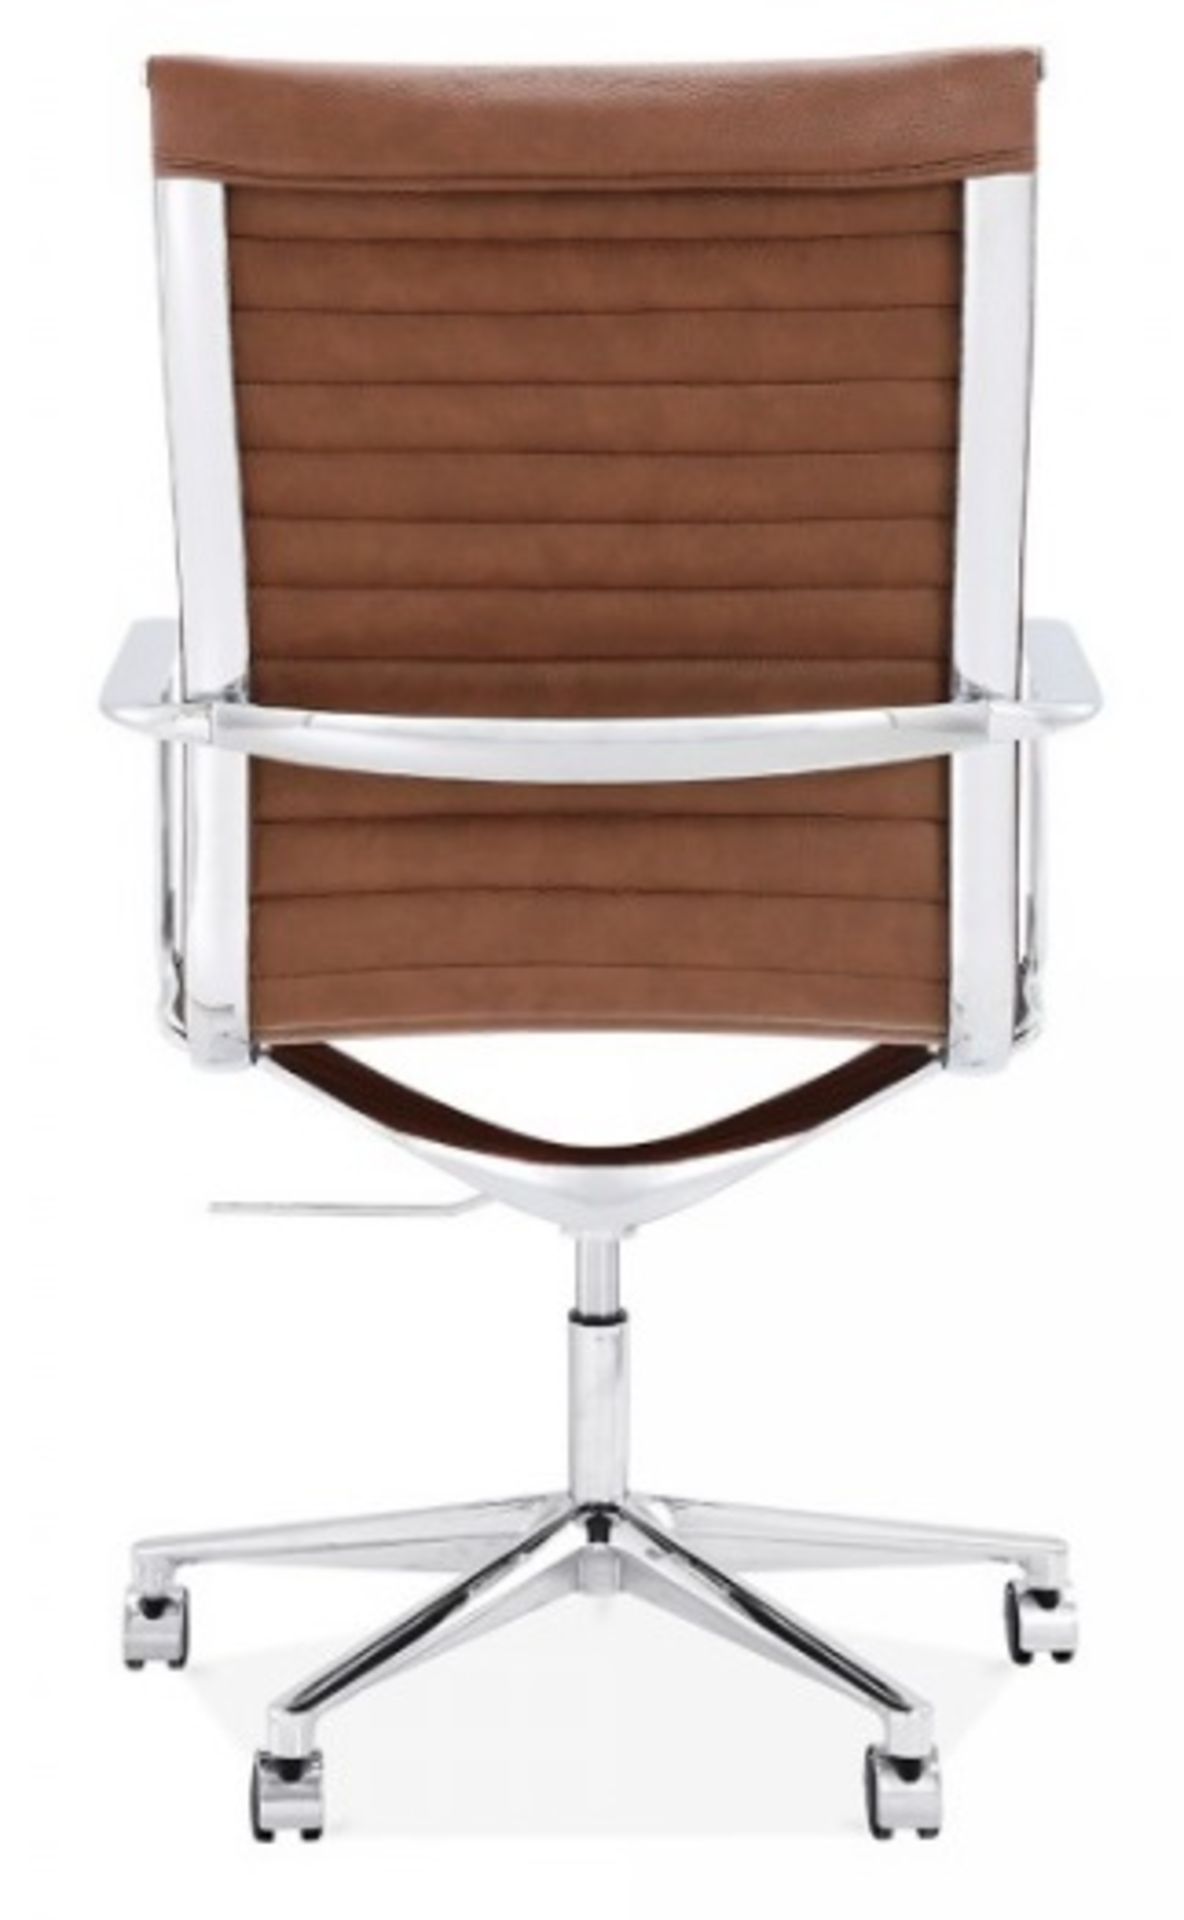 1 x LINEAR Eames-Inspired Ribbed High Back Office Swivel Chair In Brown Leather- New / Unboxed Stock - Image 4 of 5